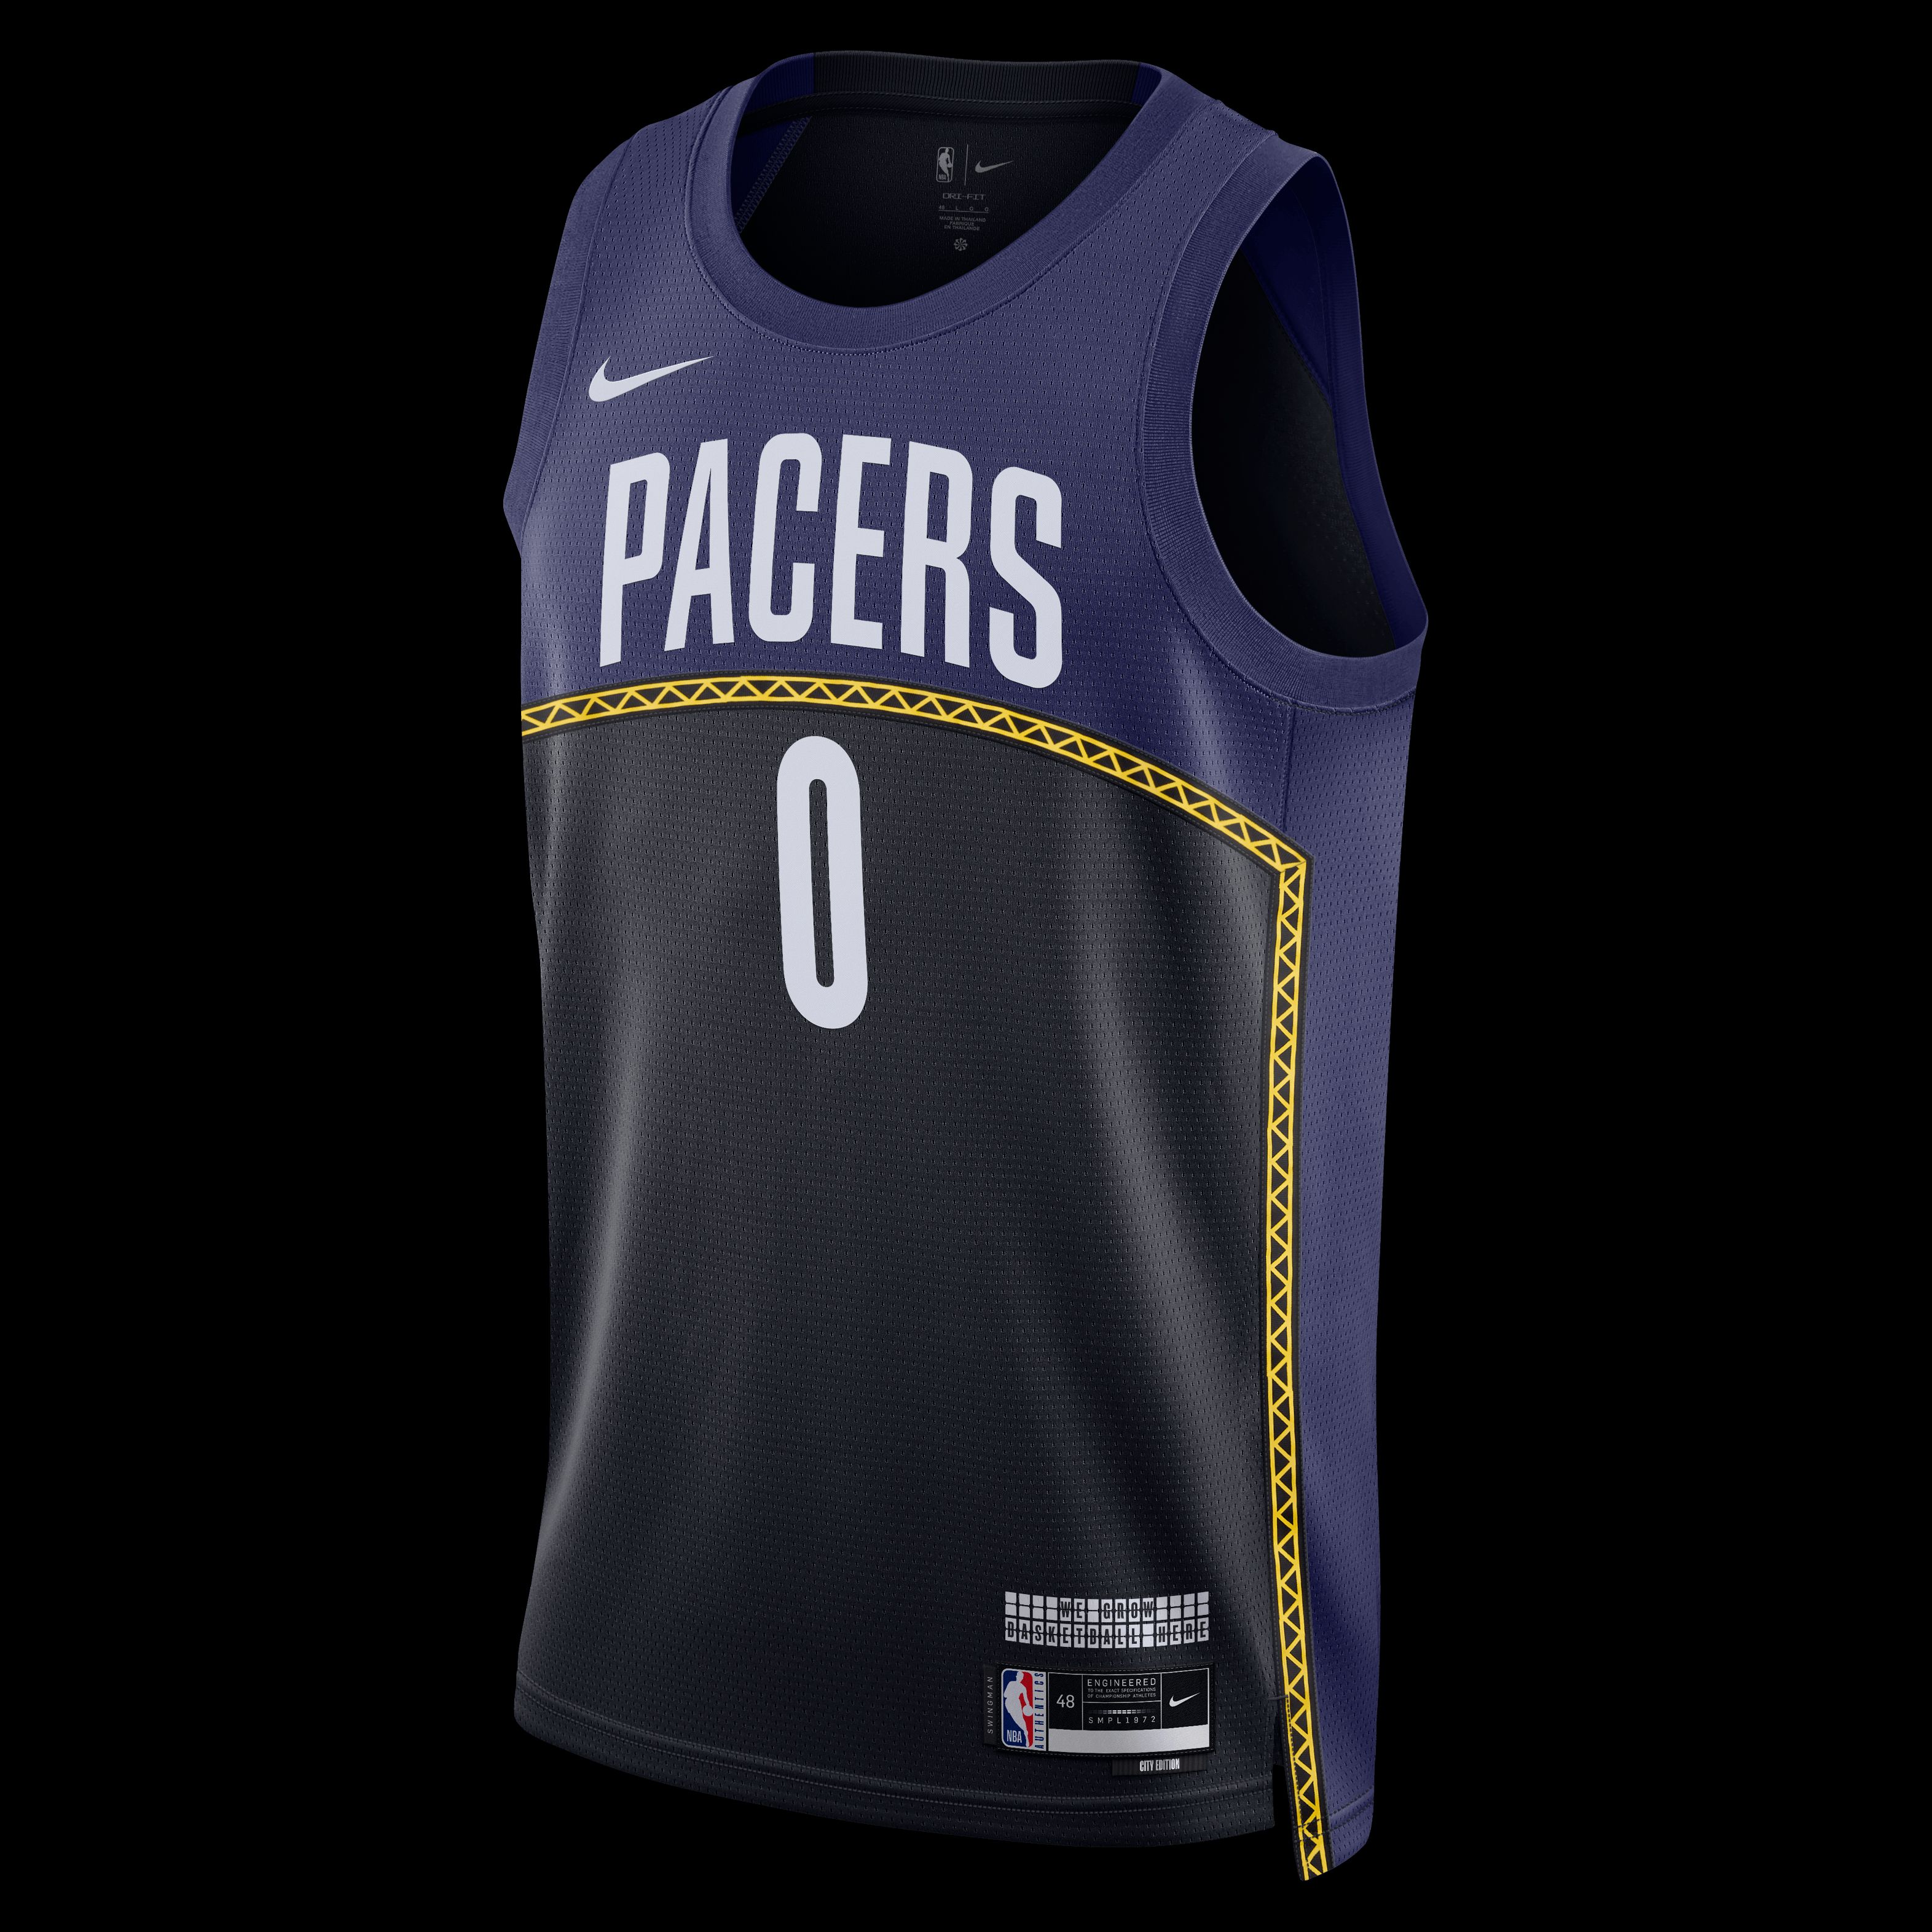 Indiana Pacers Gear, Pacers Jerseys, Store, Pacers Pro Shop, Apparel